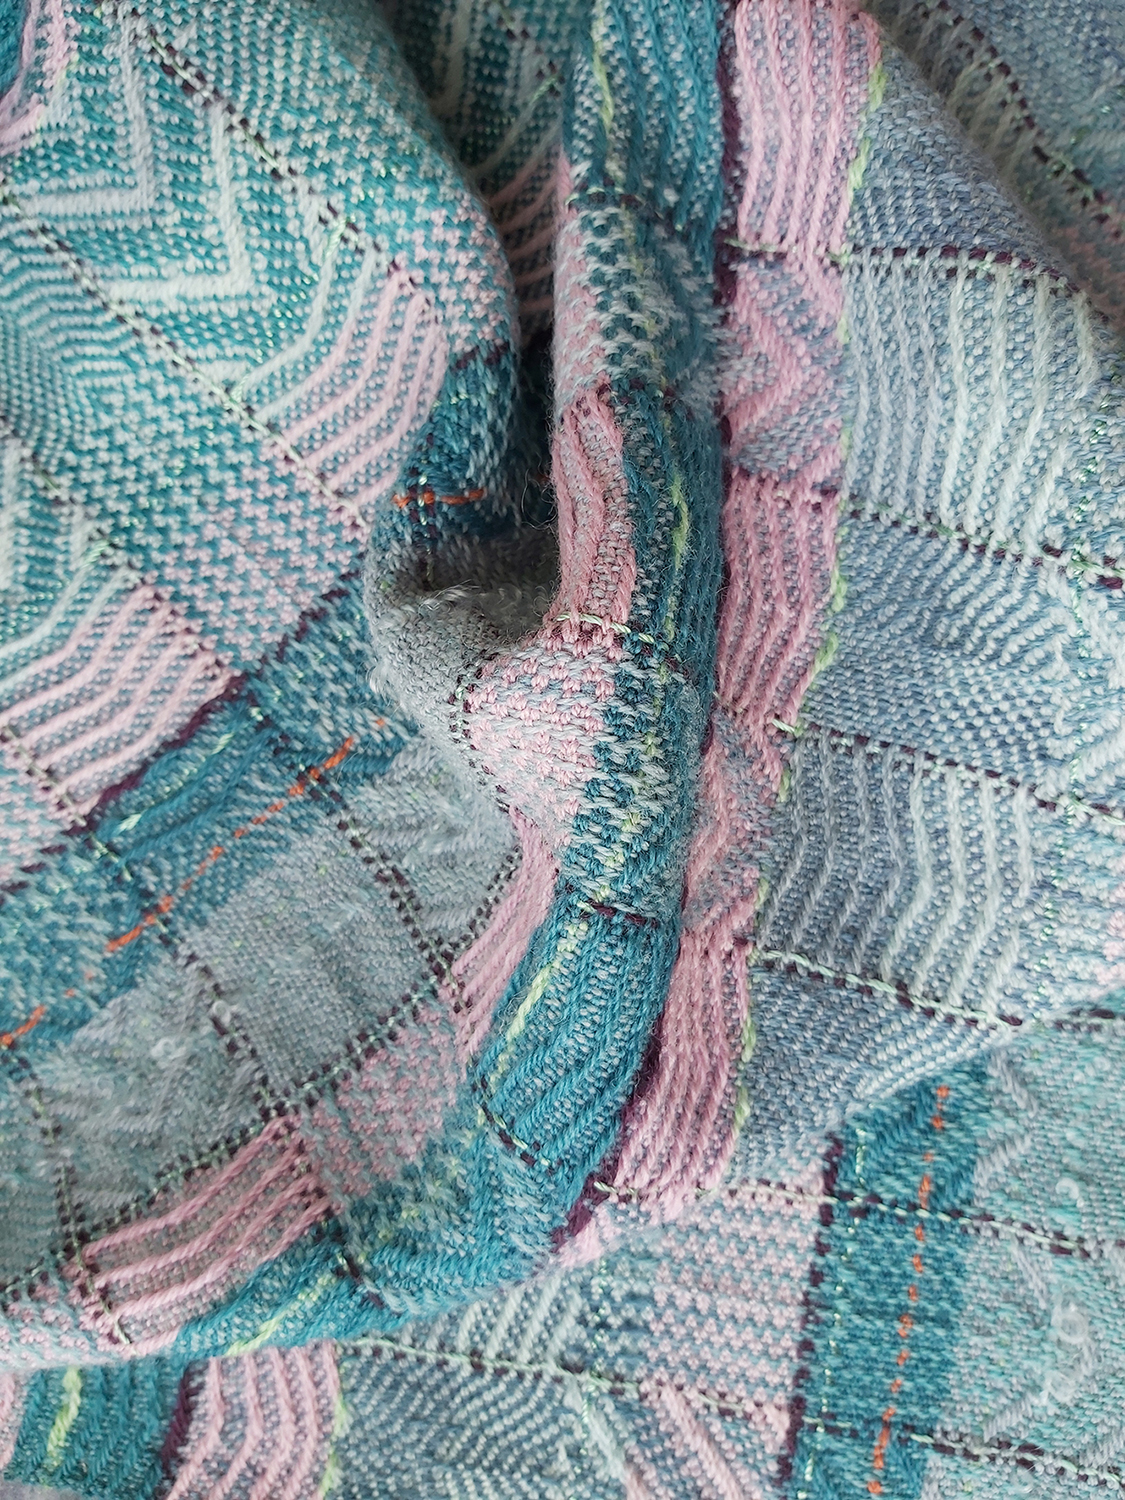 Woven fabric with vertical pattern stripes and horizontal colour stripes, in turquoise, lavender, plum and pale blue.